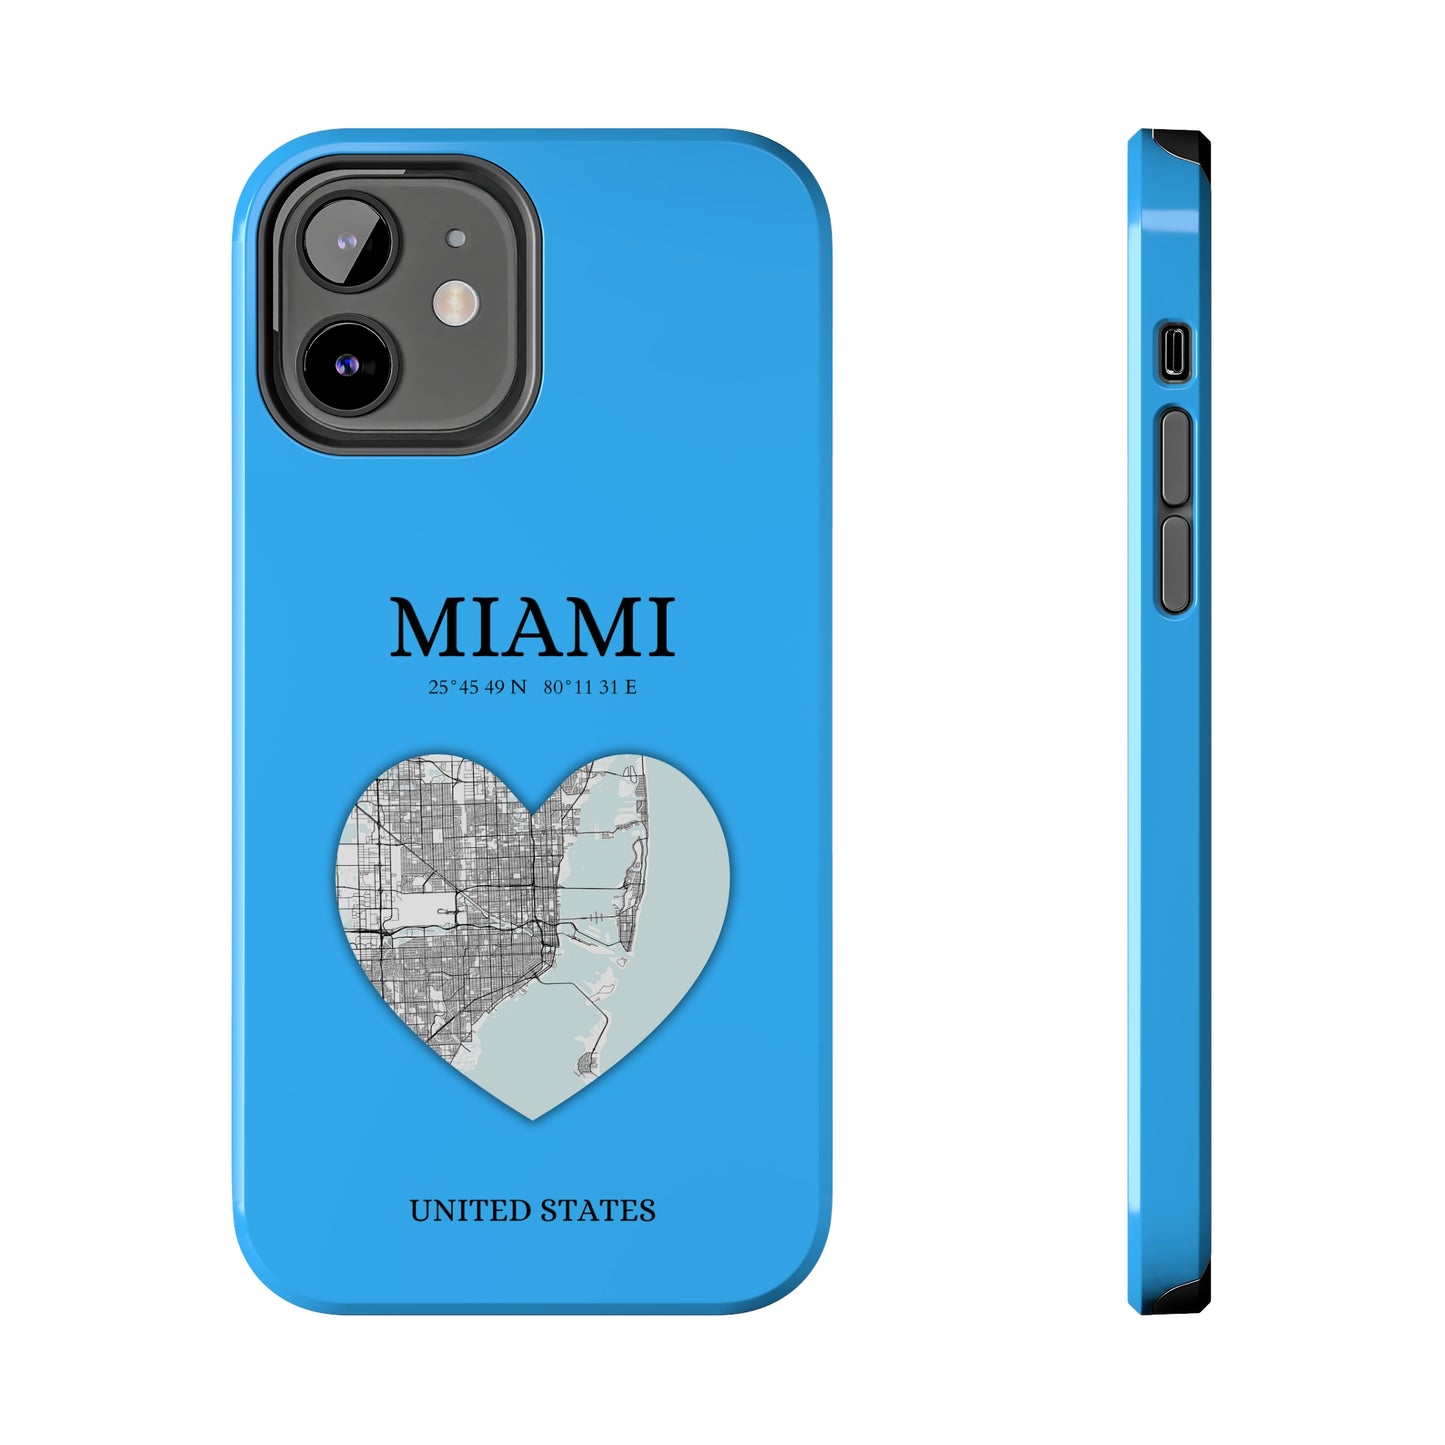 Miami Heartbeat - Sky Blue (iPhone Case 11-15)Capture the essence of Miami with RimaGallery's Heartbeat Sky Blue iPhone case, blending durable protection and unique design. Perfect for iPhone 11-15 models. Free RimaGallery